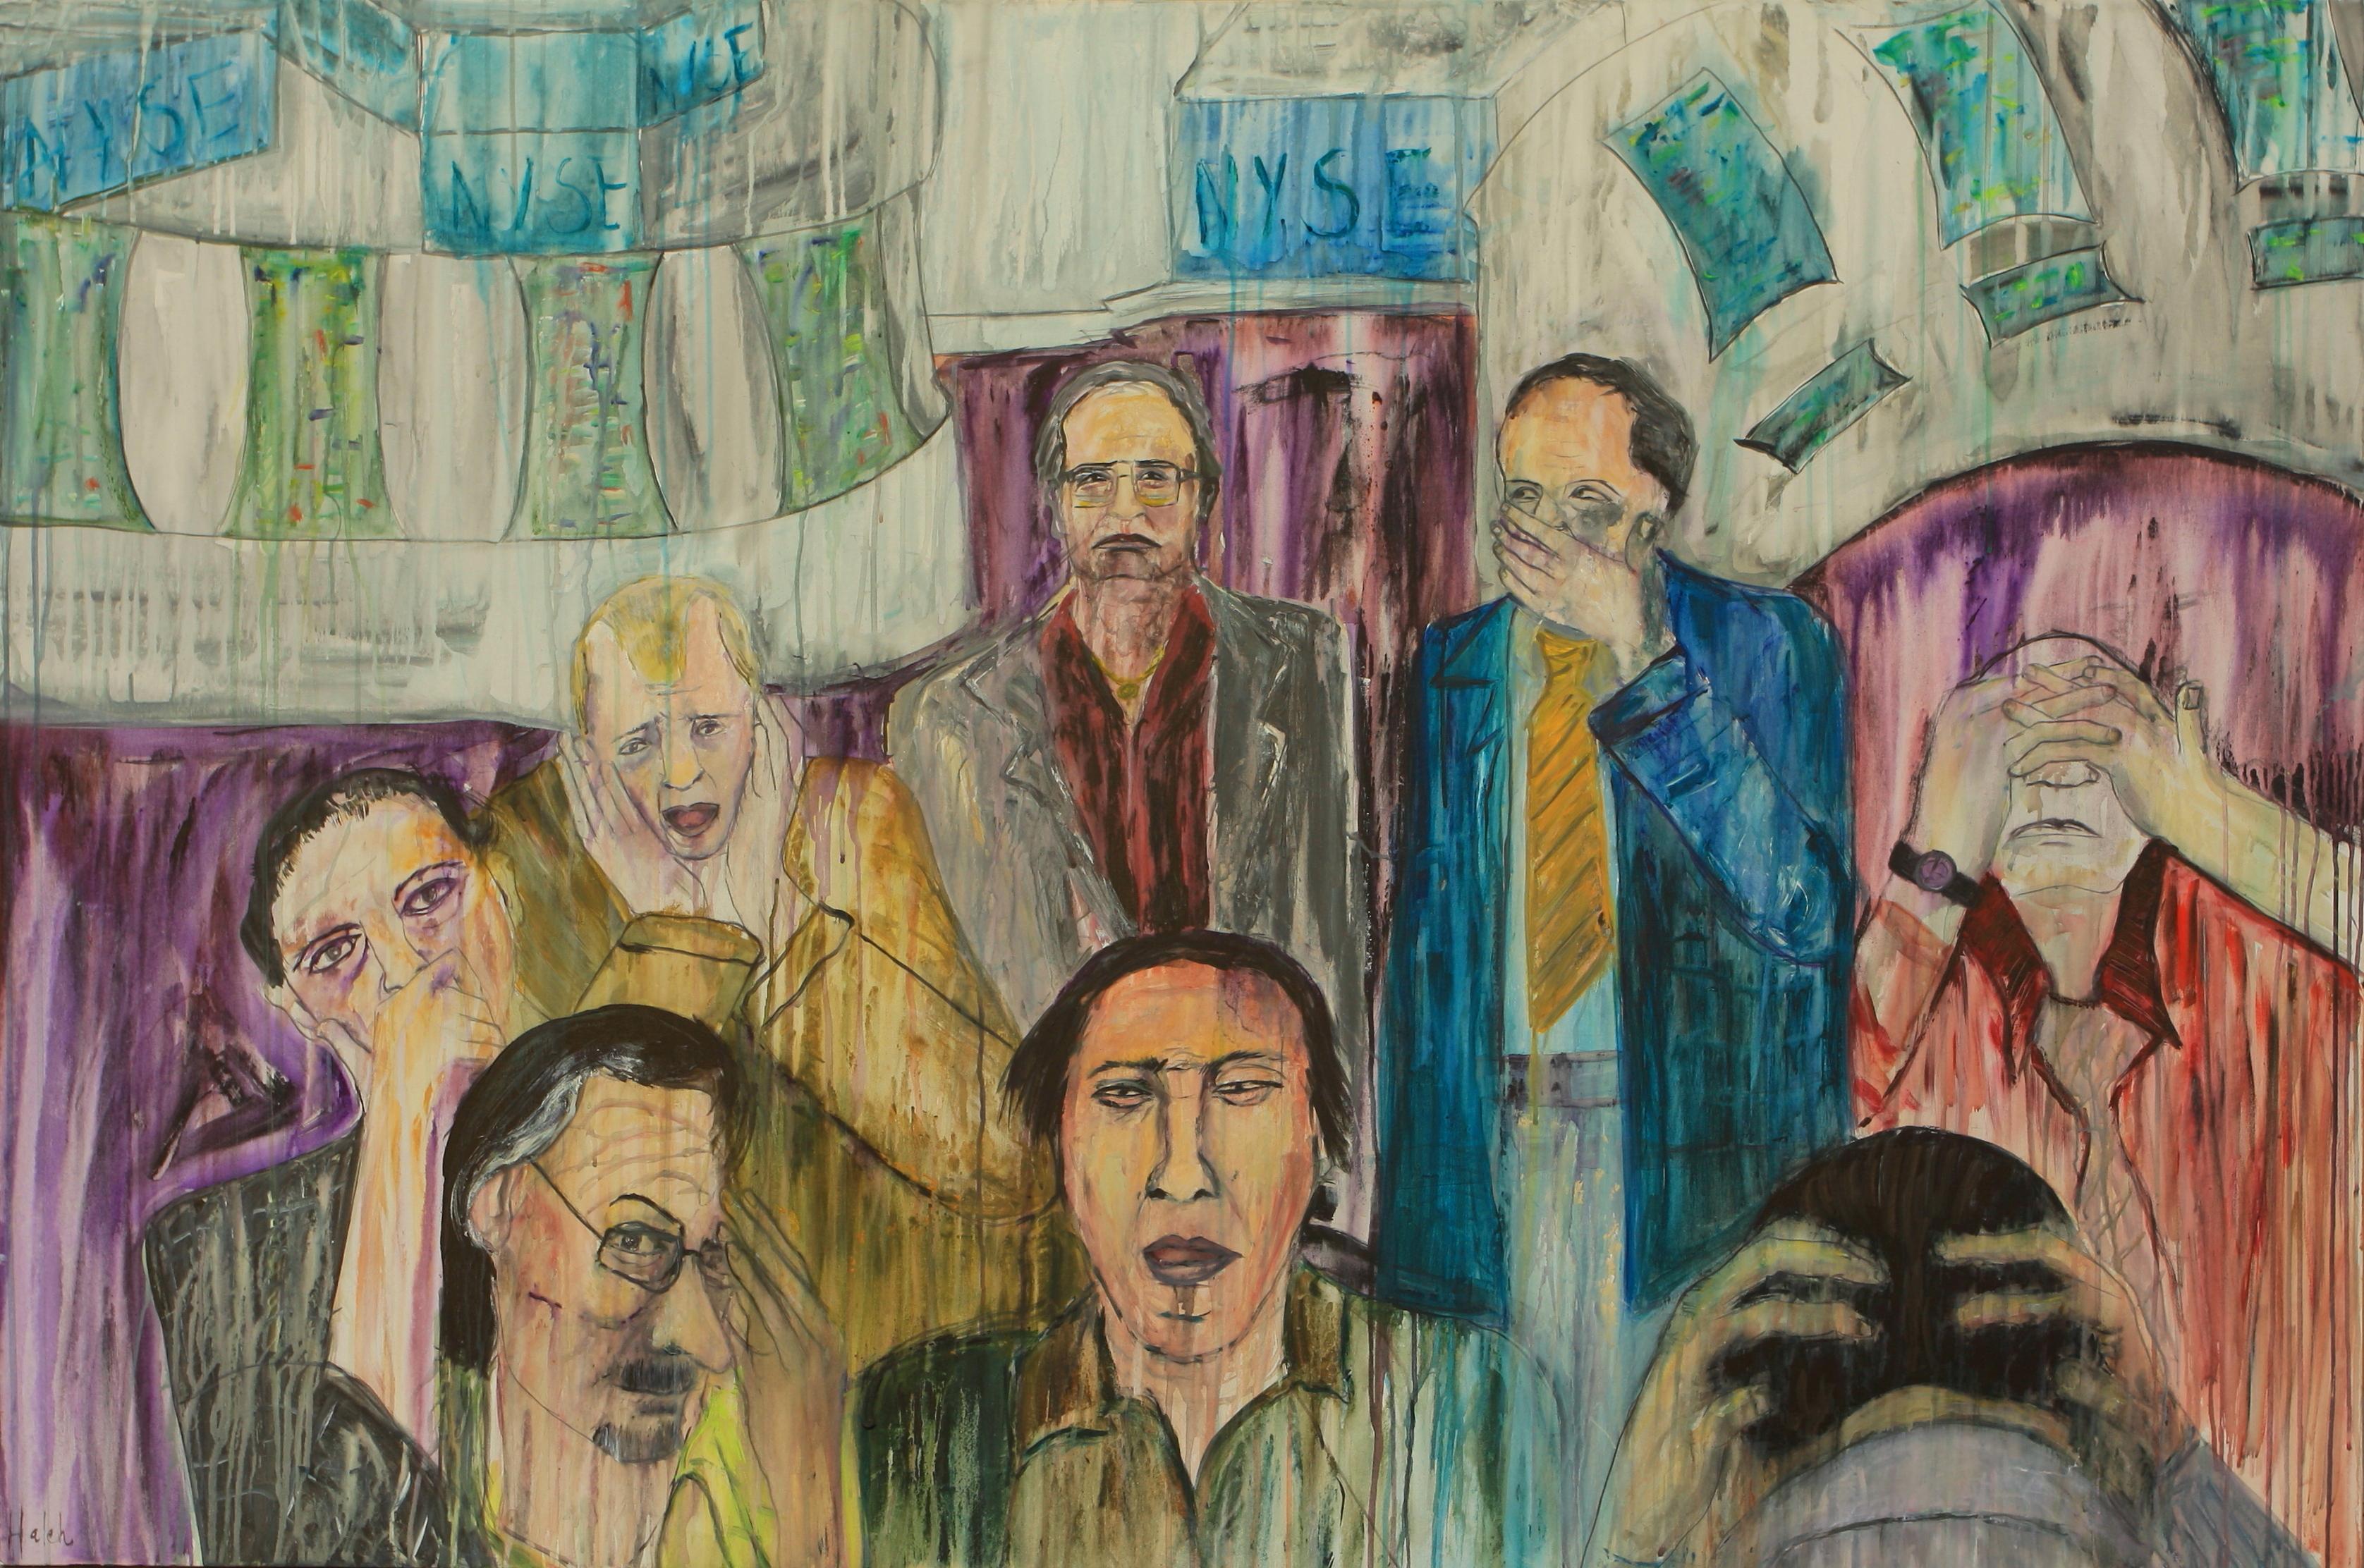 ABOUT THE ARTWORK:

The painting portrays a scene of despair and anguish as a group of men gather together, their faces filled with worry and tension. The artist captures the devastating consequences of their indulgence in risky stock market